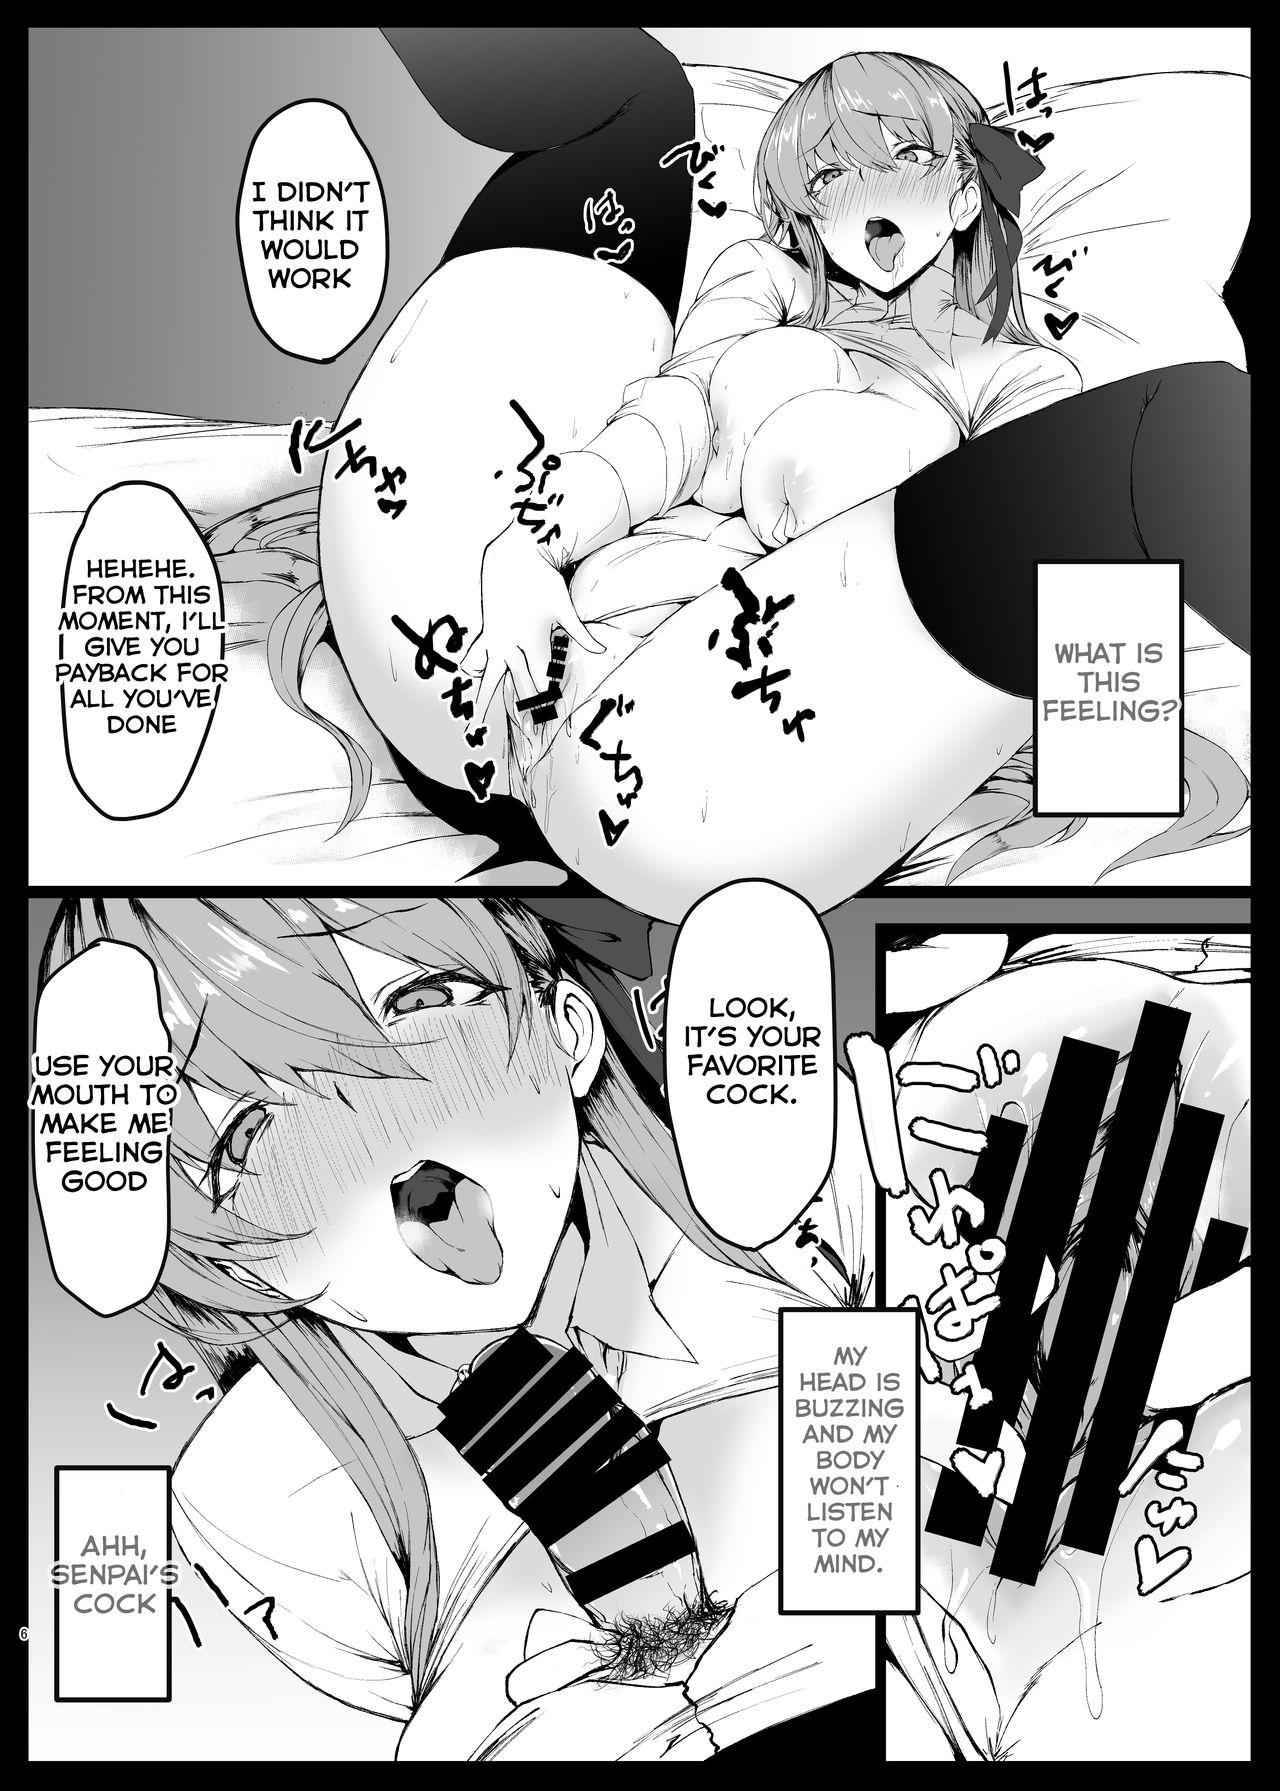 Ex Girlfriends VIOLATE A SANCTUARY 2 - Fate grand order Gaydudes - Page 6